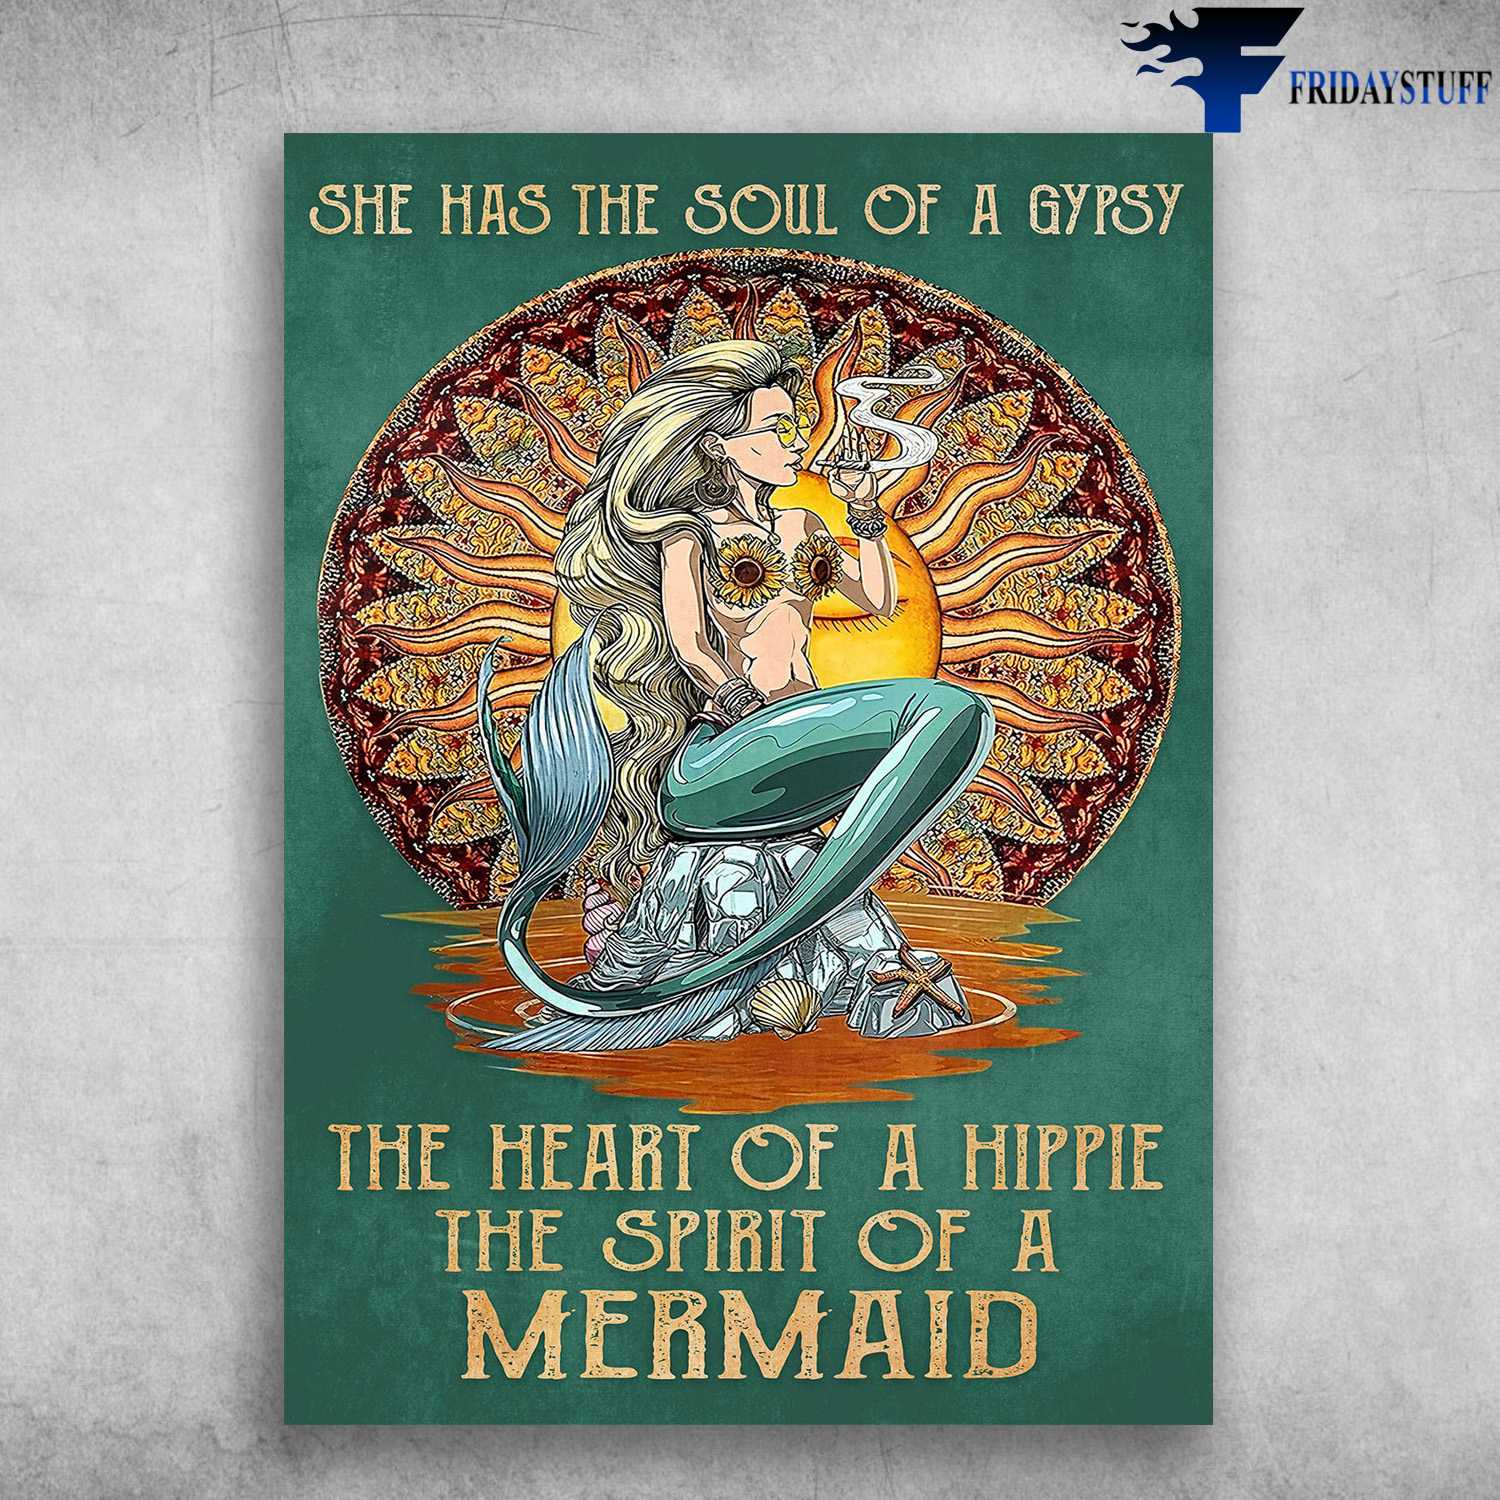 Mermaid Smoking - She Has The Soul Of A Gypsy, The Heart Of A Hippie, The Sprit Of A Mermaid